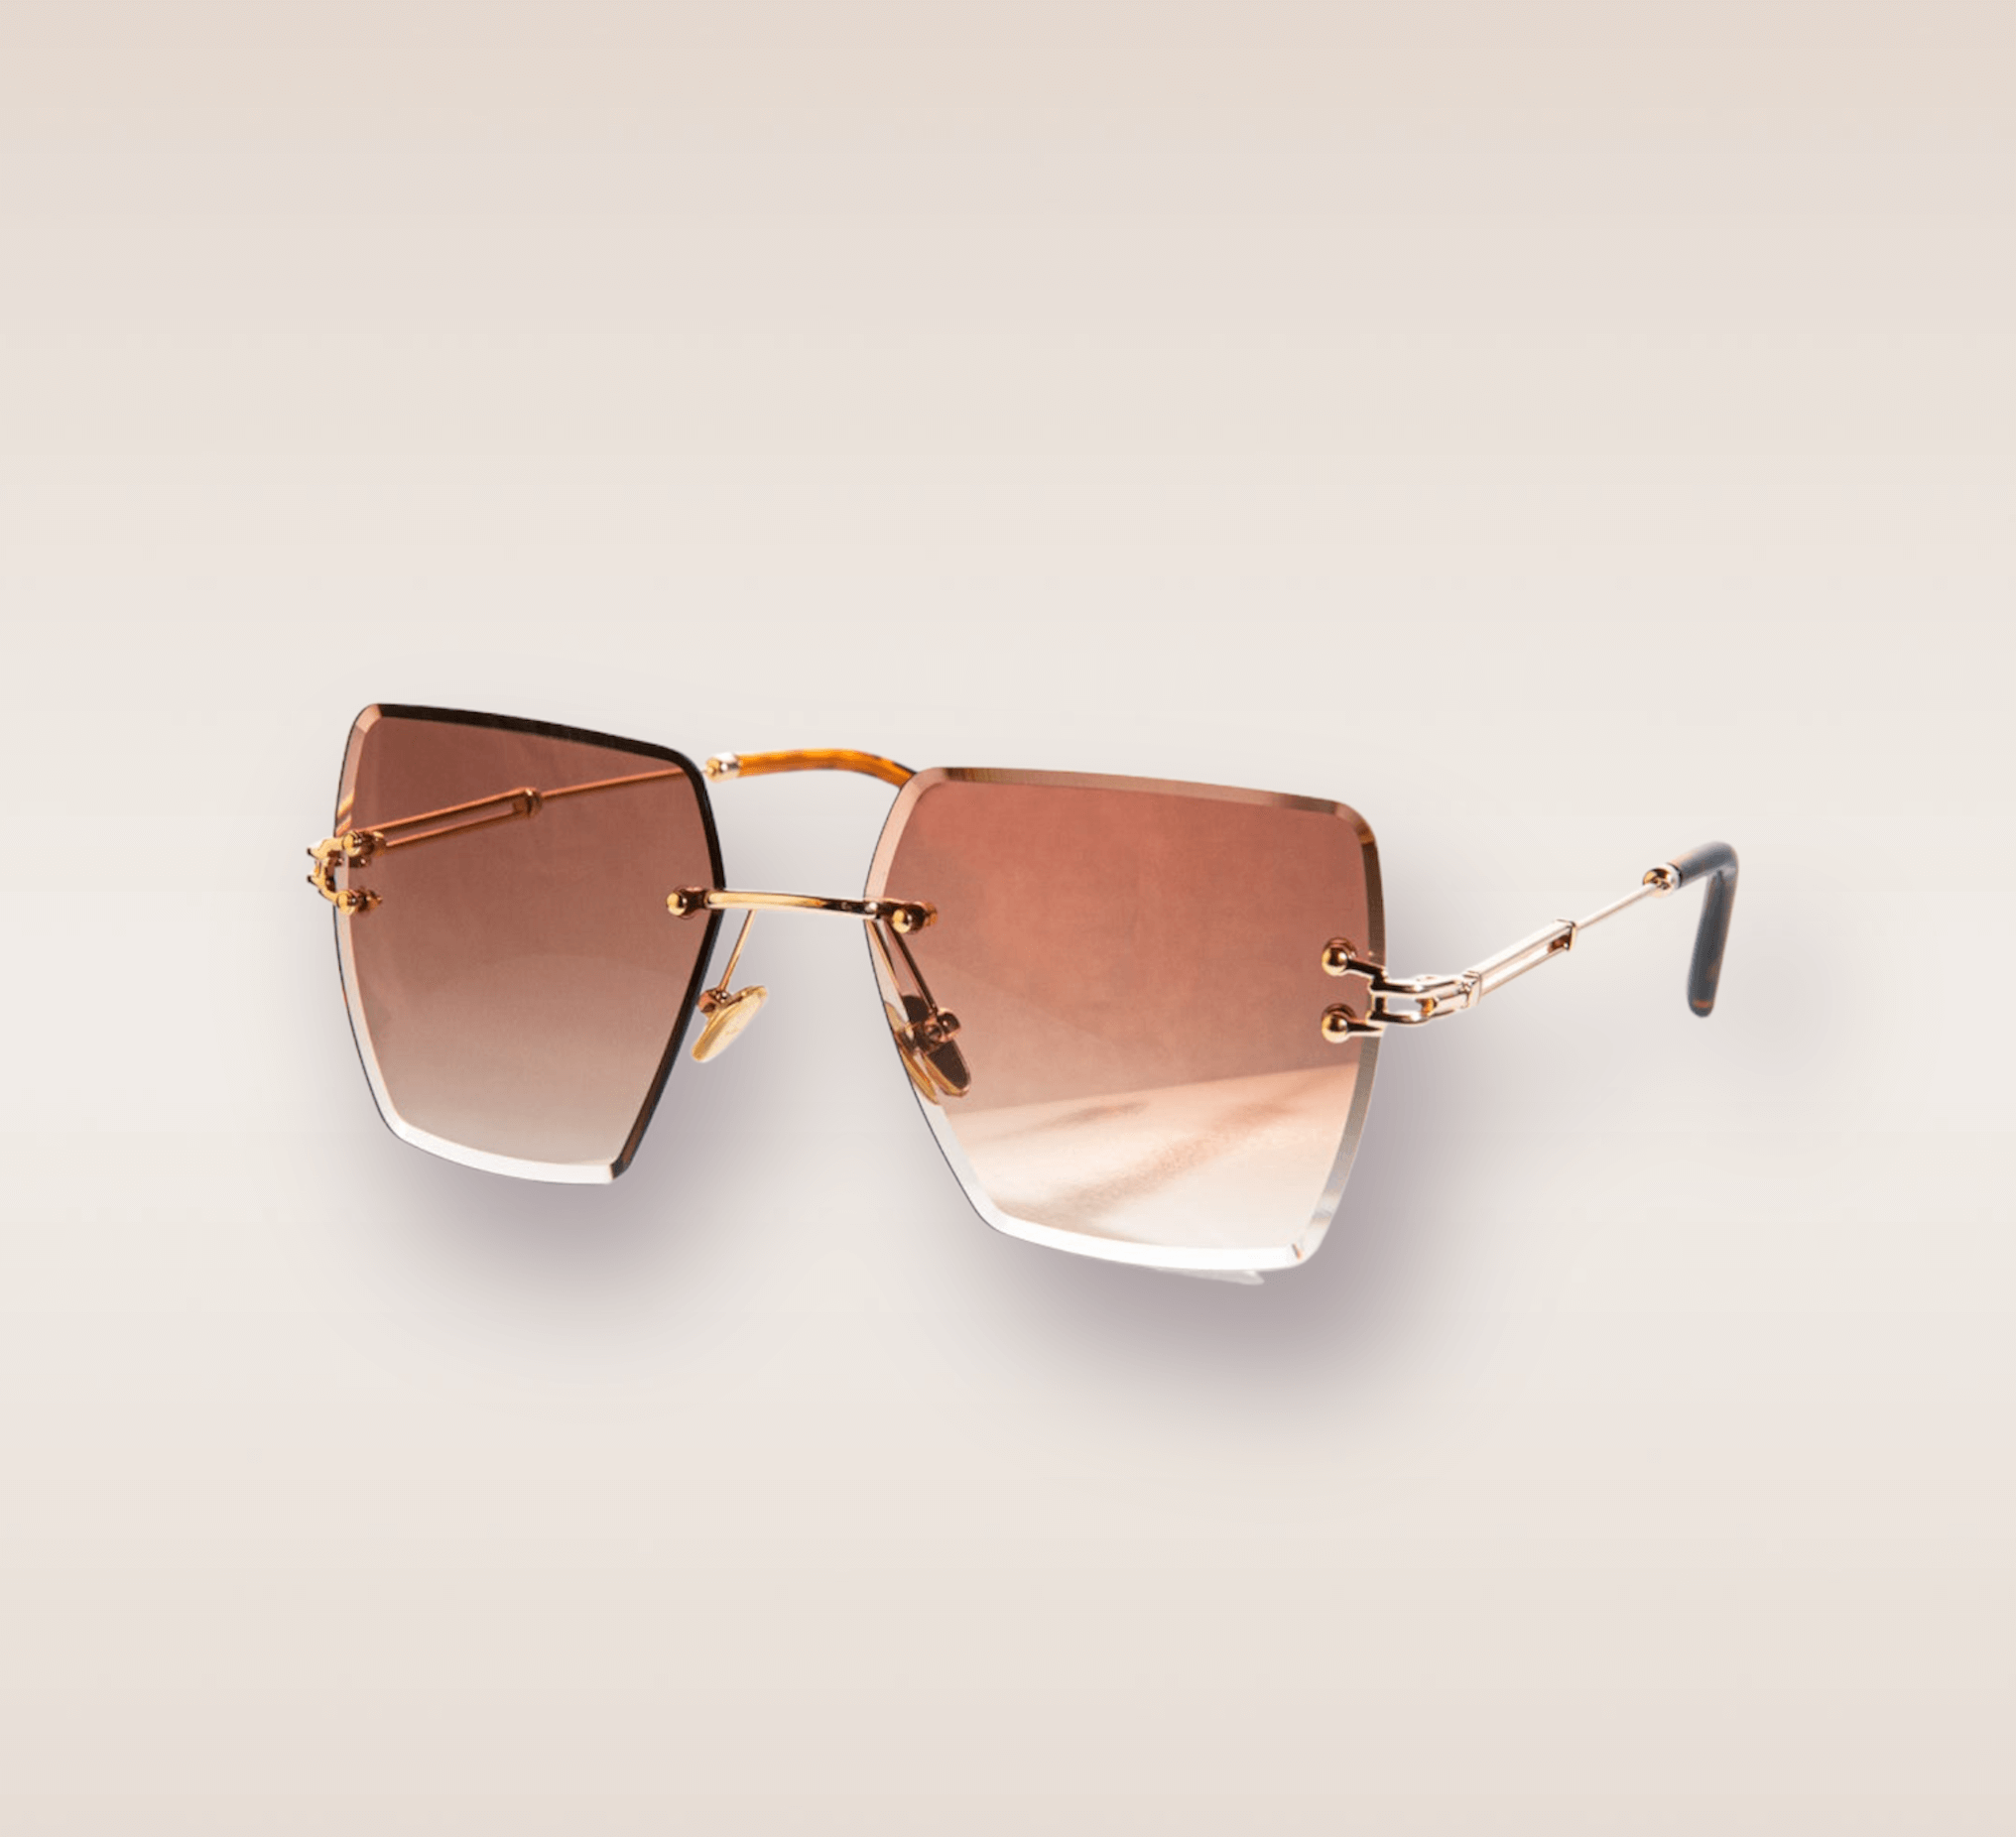 In this up-close shot, we are introduced to the captivating Coco frames, a stylish and sophisticated eyewear option. The rimless frames feature a mesmerizing brown gradient hue. The gold arms add a touch of opulence and refinement, complimenting the brown tones with a warm metallic accent. These frames are a true fashion statement, combining modern design with a touch of luxury. 